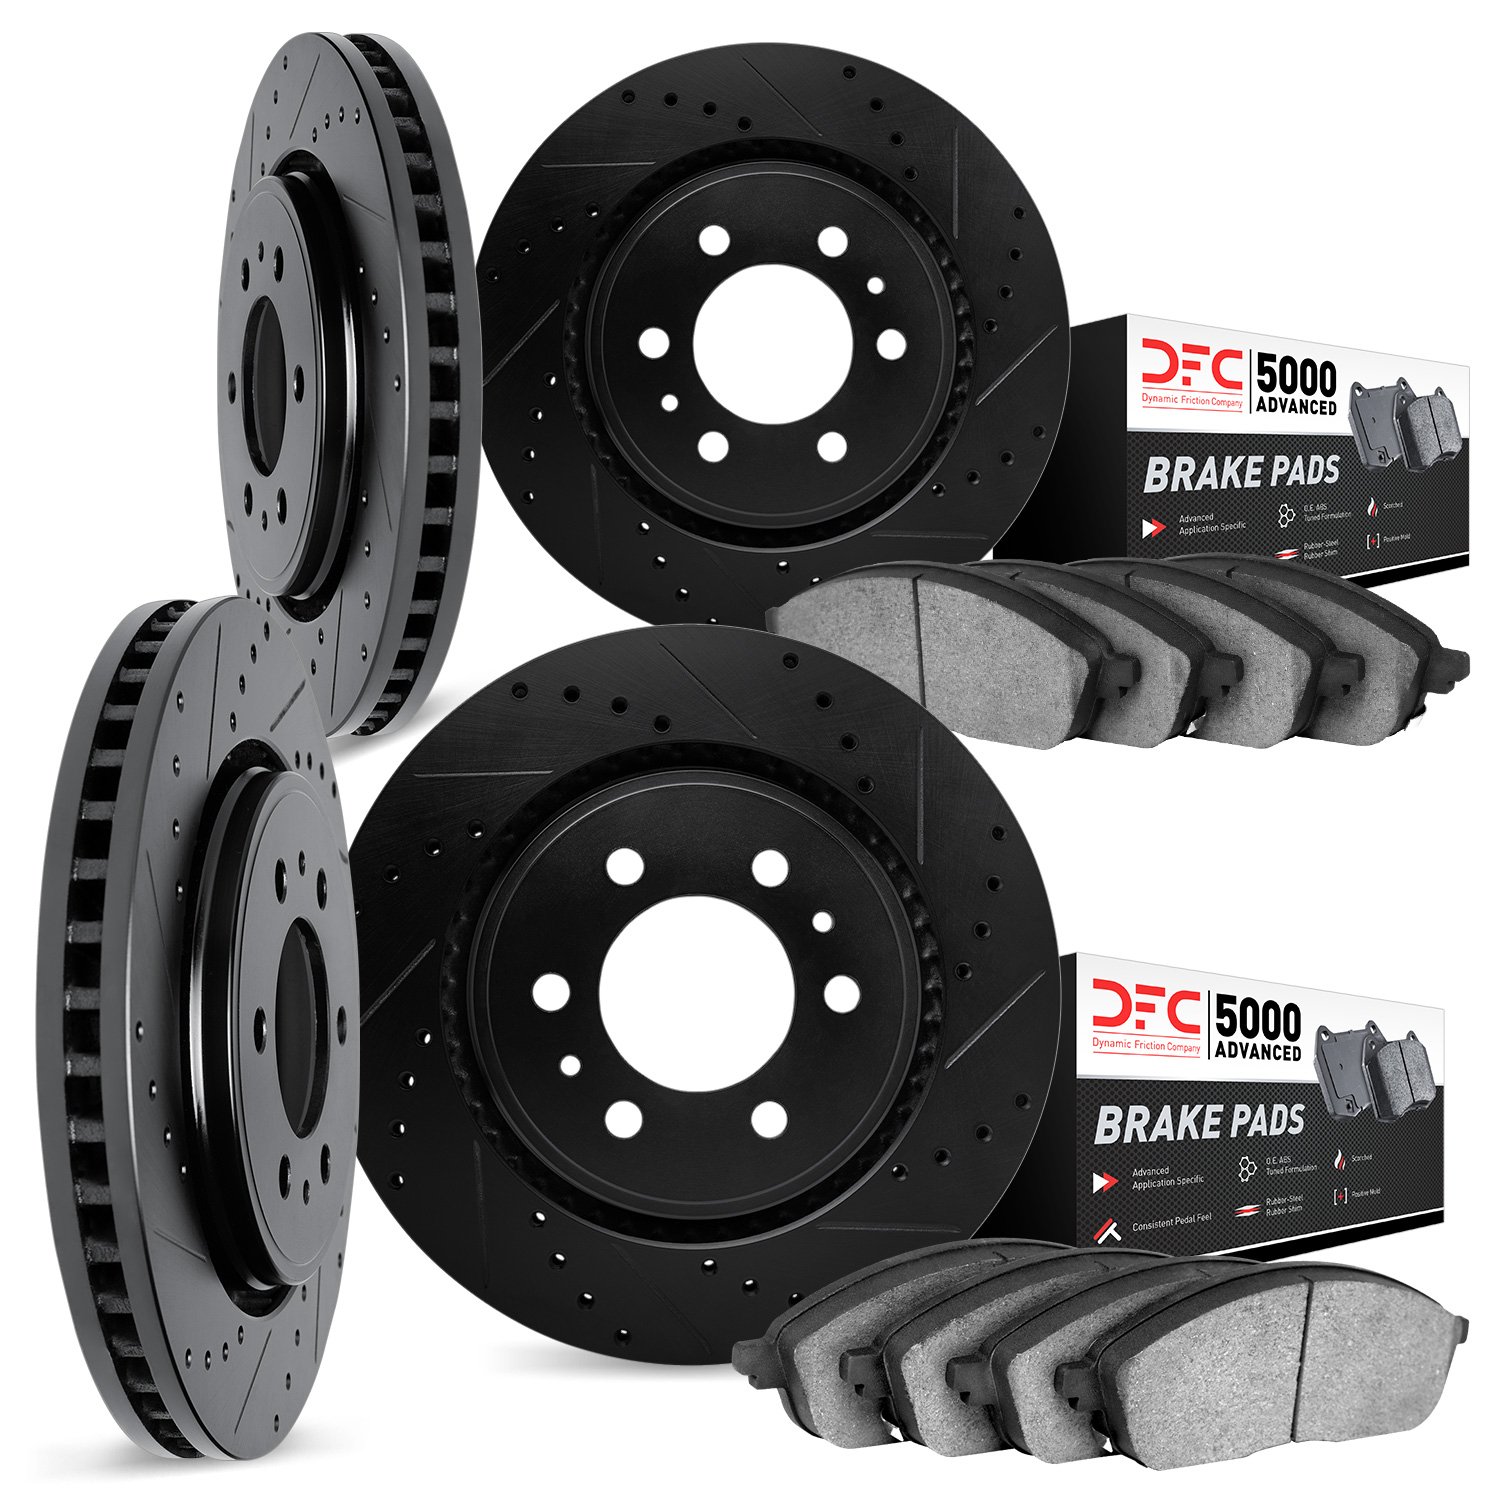 8504-48006 Drilled/Slotted Brake Rotors w/5000 Advanced Brake Pads Kit [Black], 2003-2005 GM, Position: Front and Rear